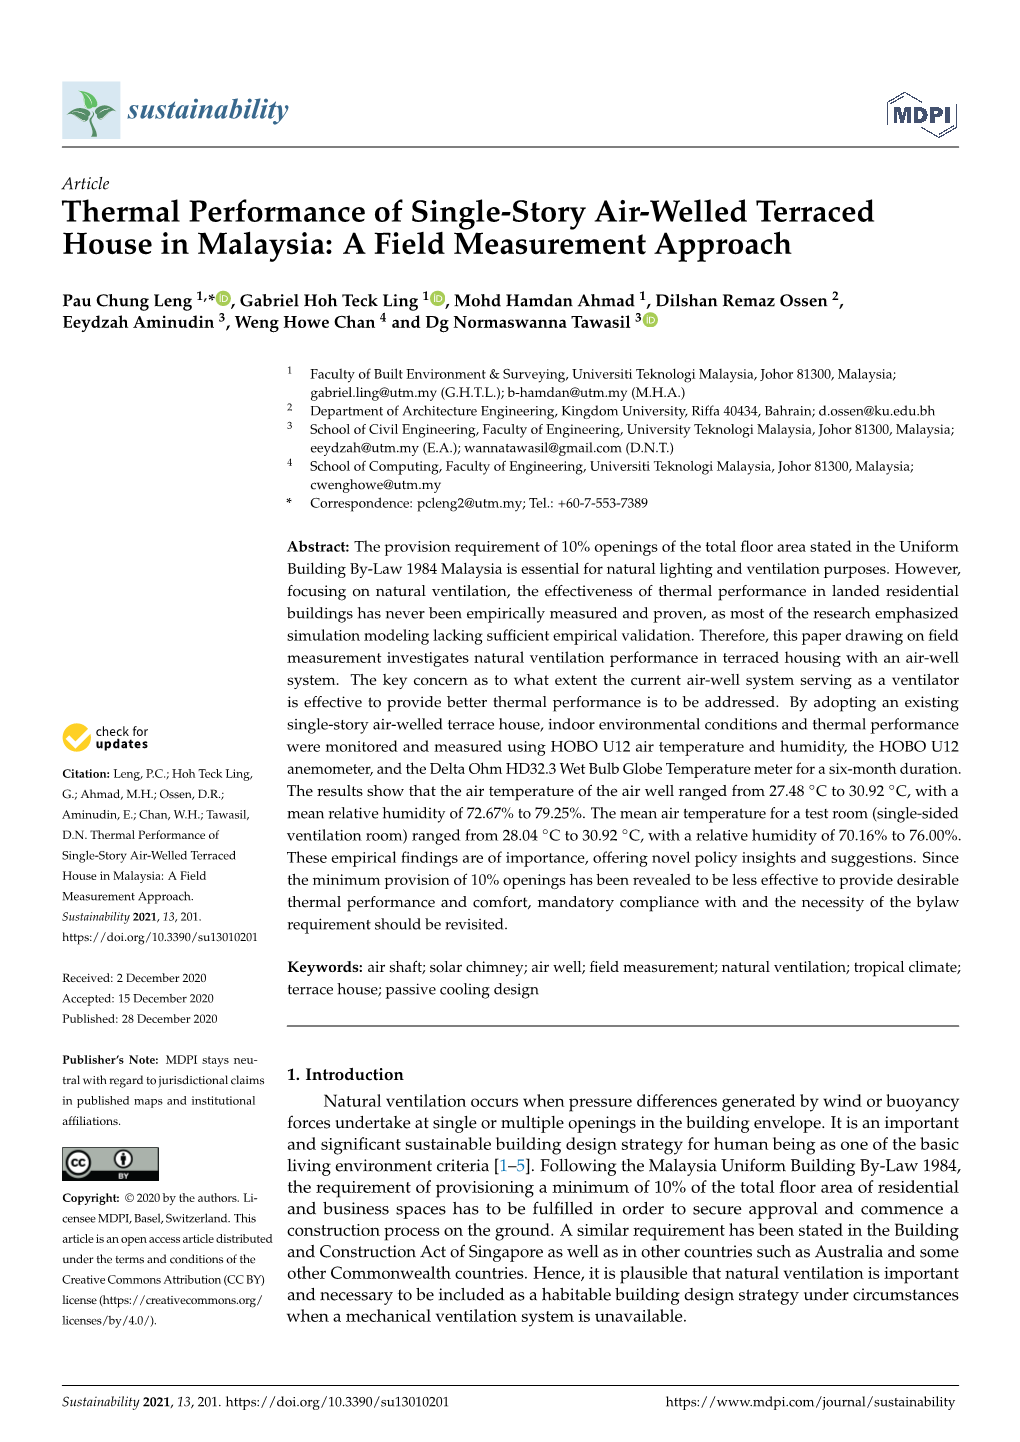 Thermal Performance of Single-Story Air-Welled Terraced House in Malaysia: a Field Measurement Approach